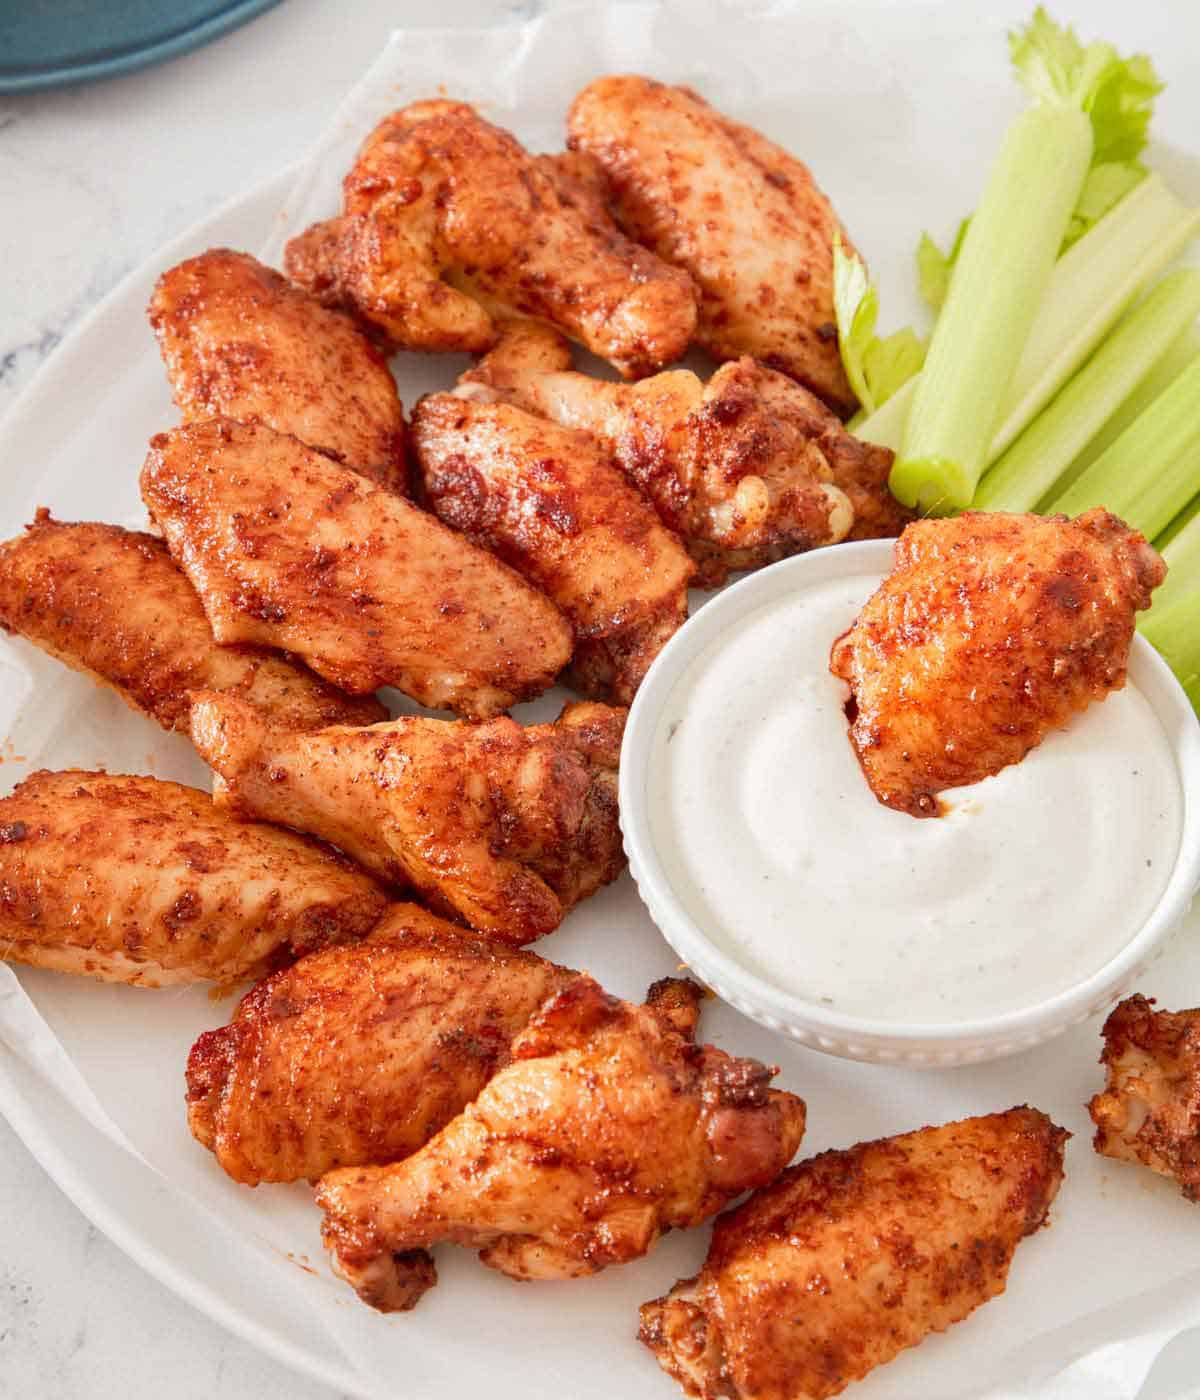 A serving plate with multiple chicken wings and celery with one wing in a bowl of dip.